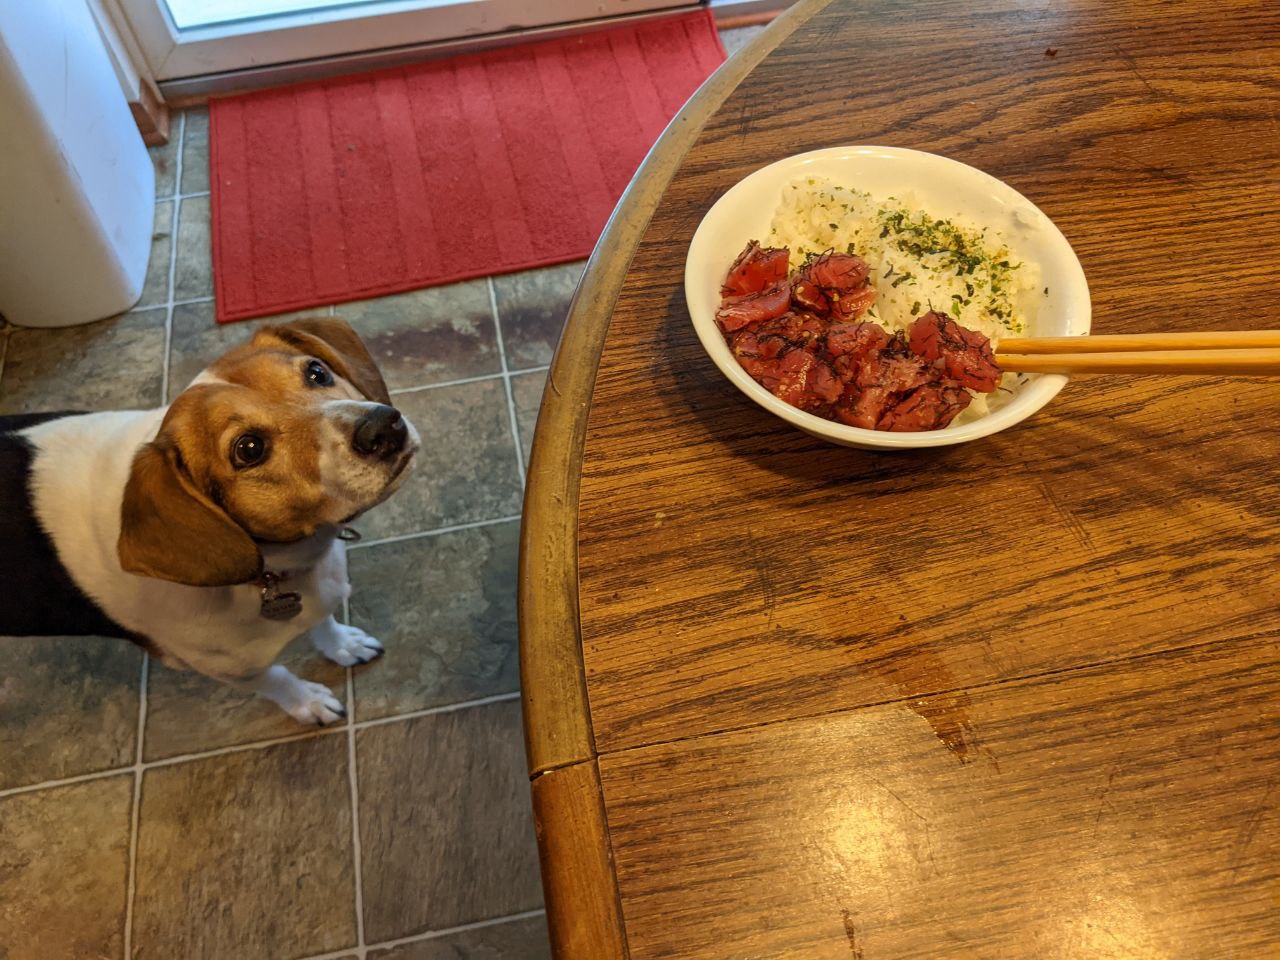 Togo sniffing and staring longingly at a bowl of poke.